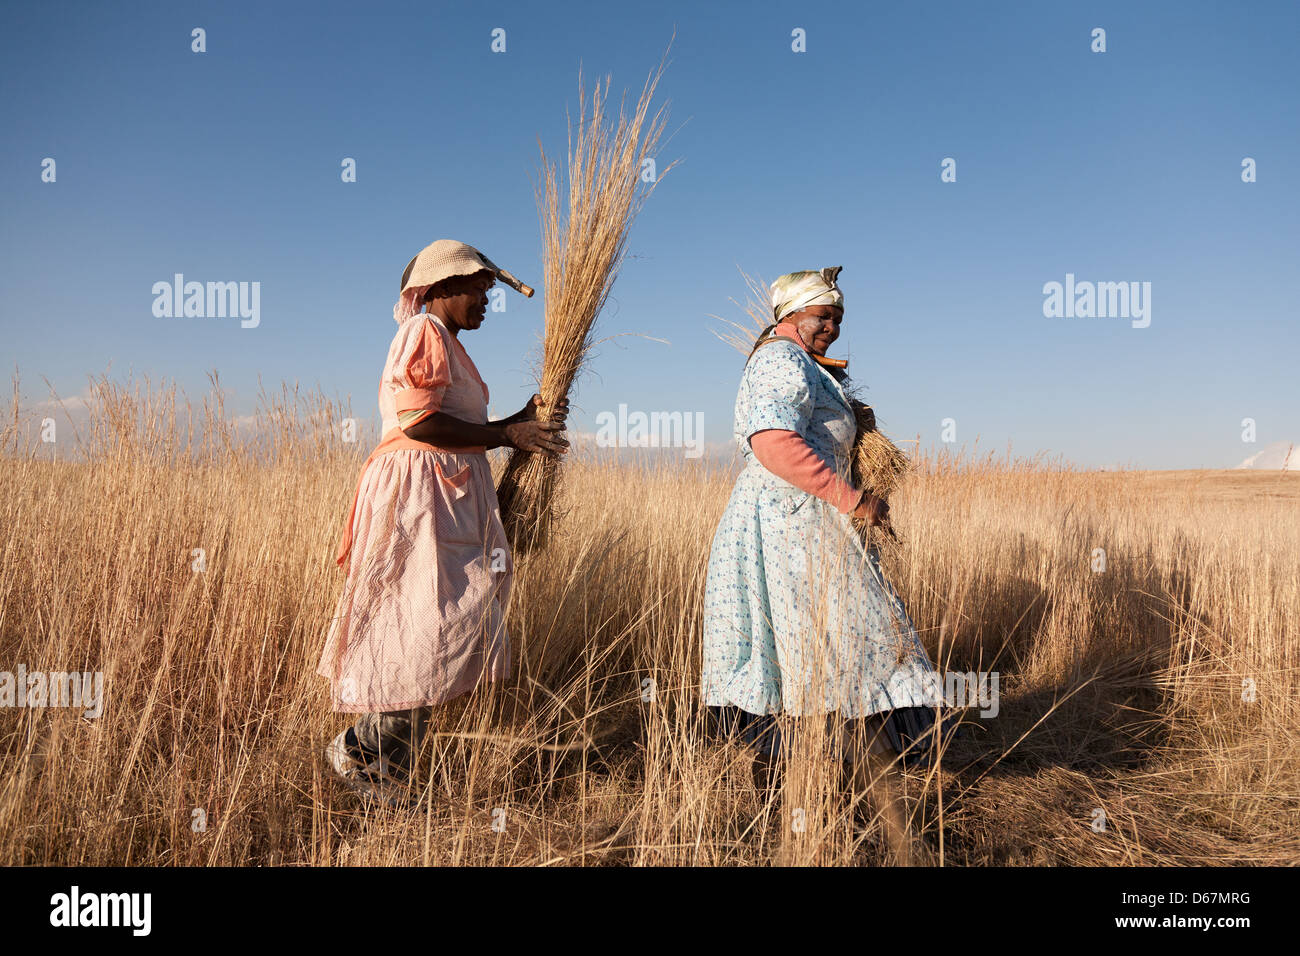 African women collecting and tying bundles of grass in the field Stock Photo